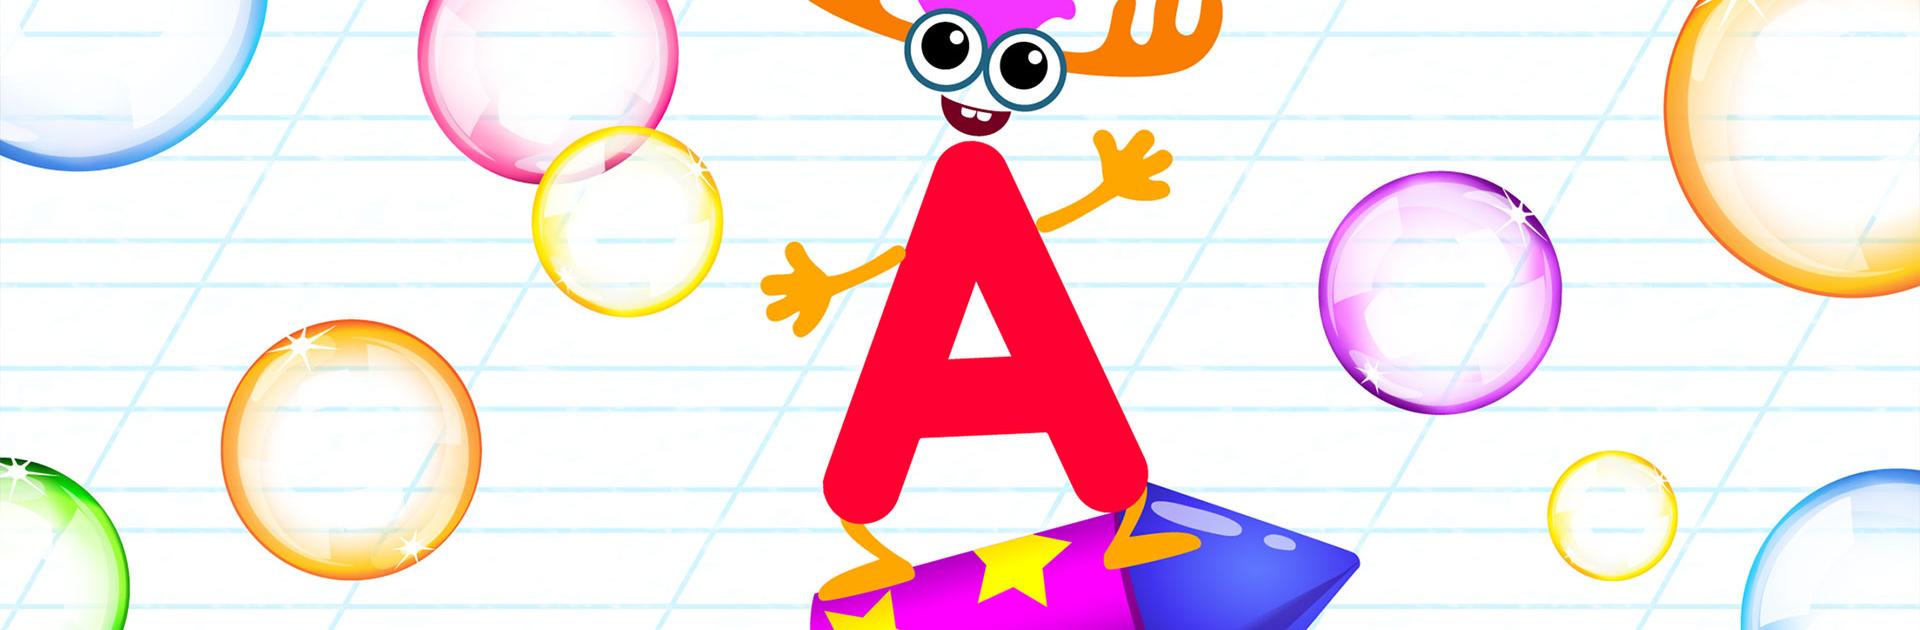 Play Bini ABC games for kids! Online